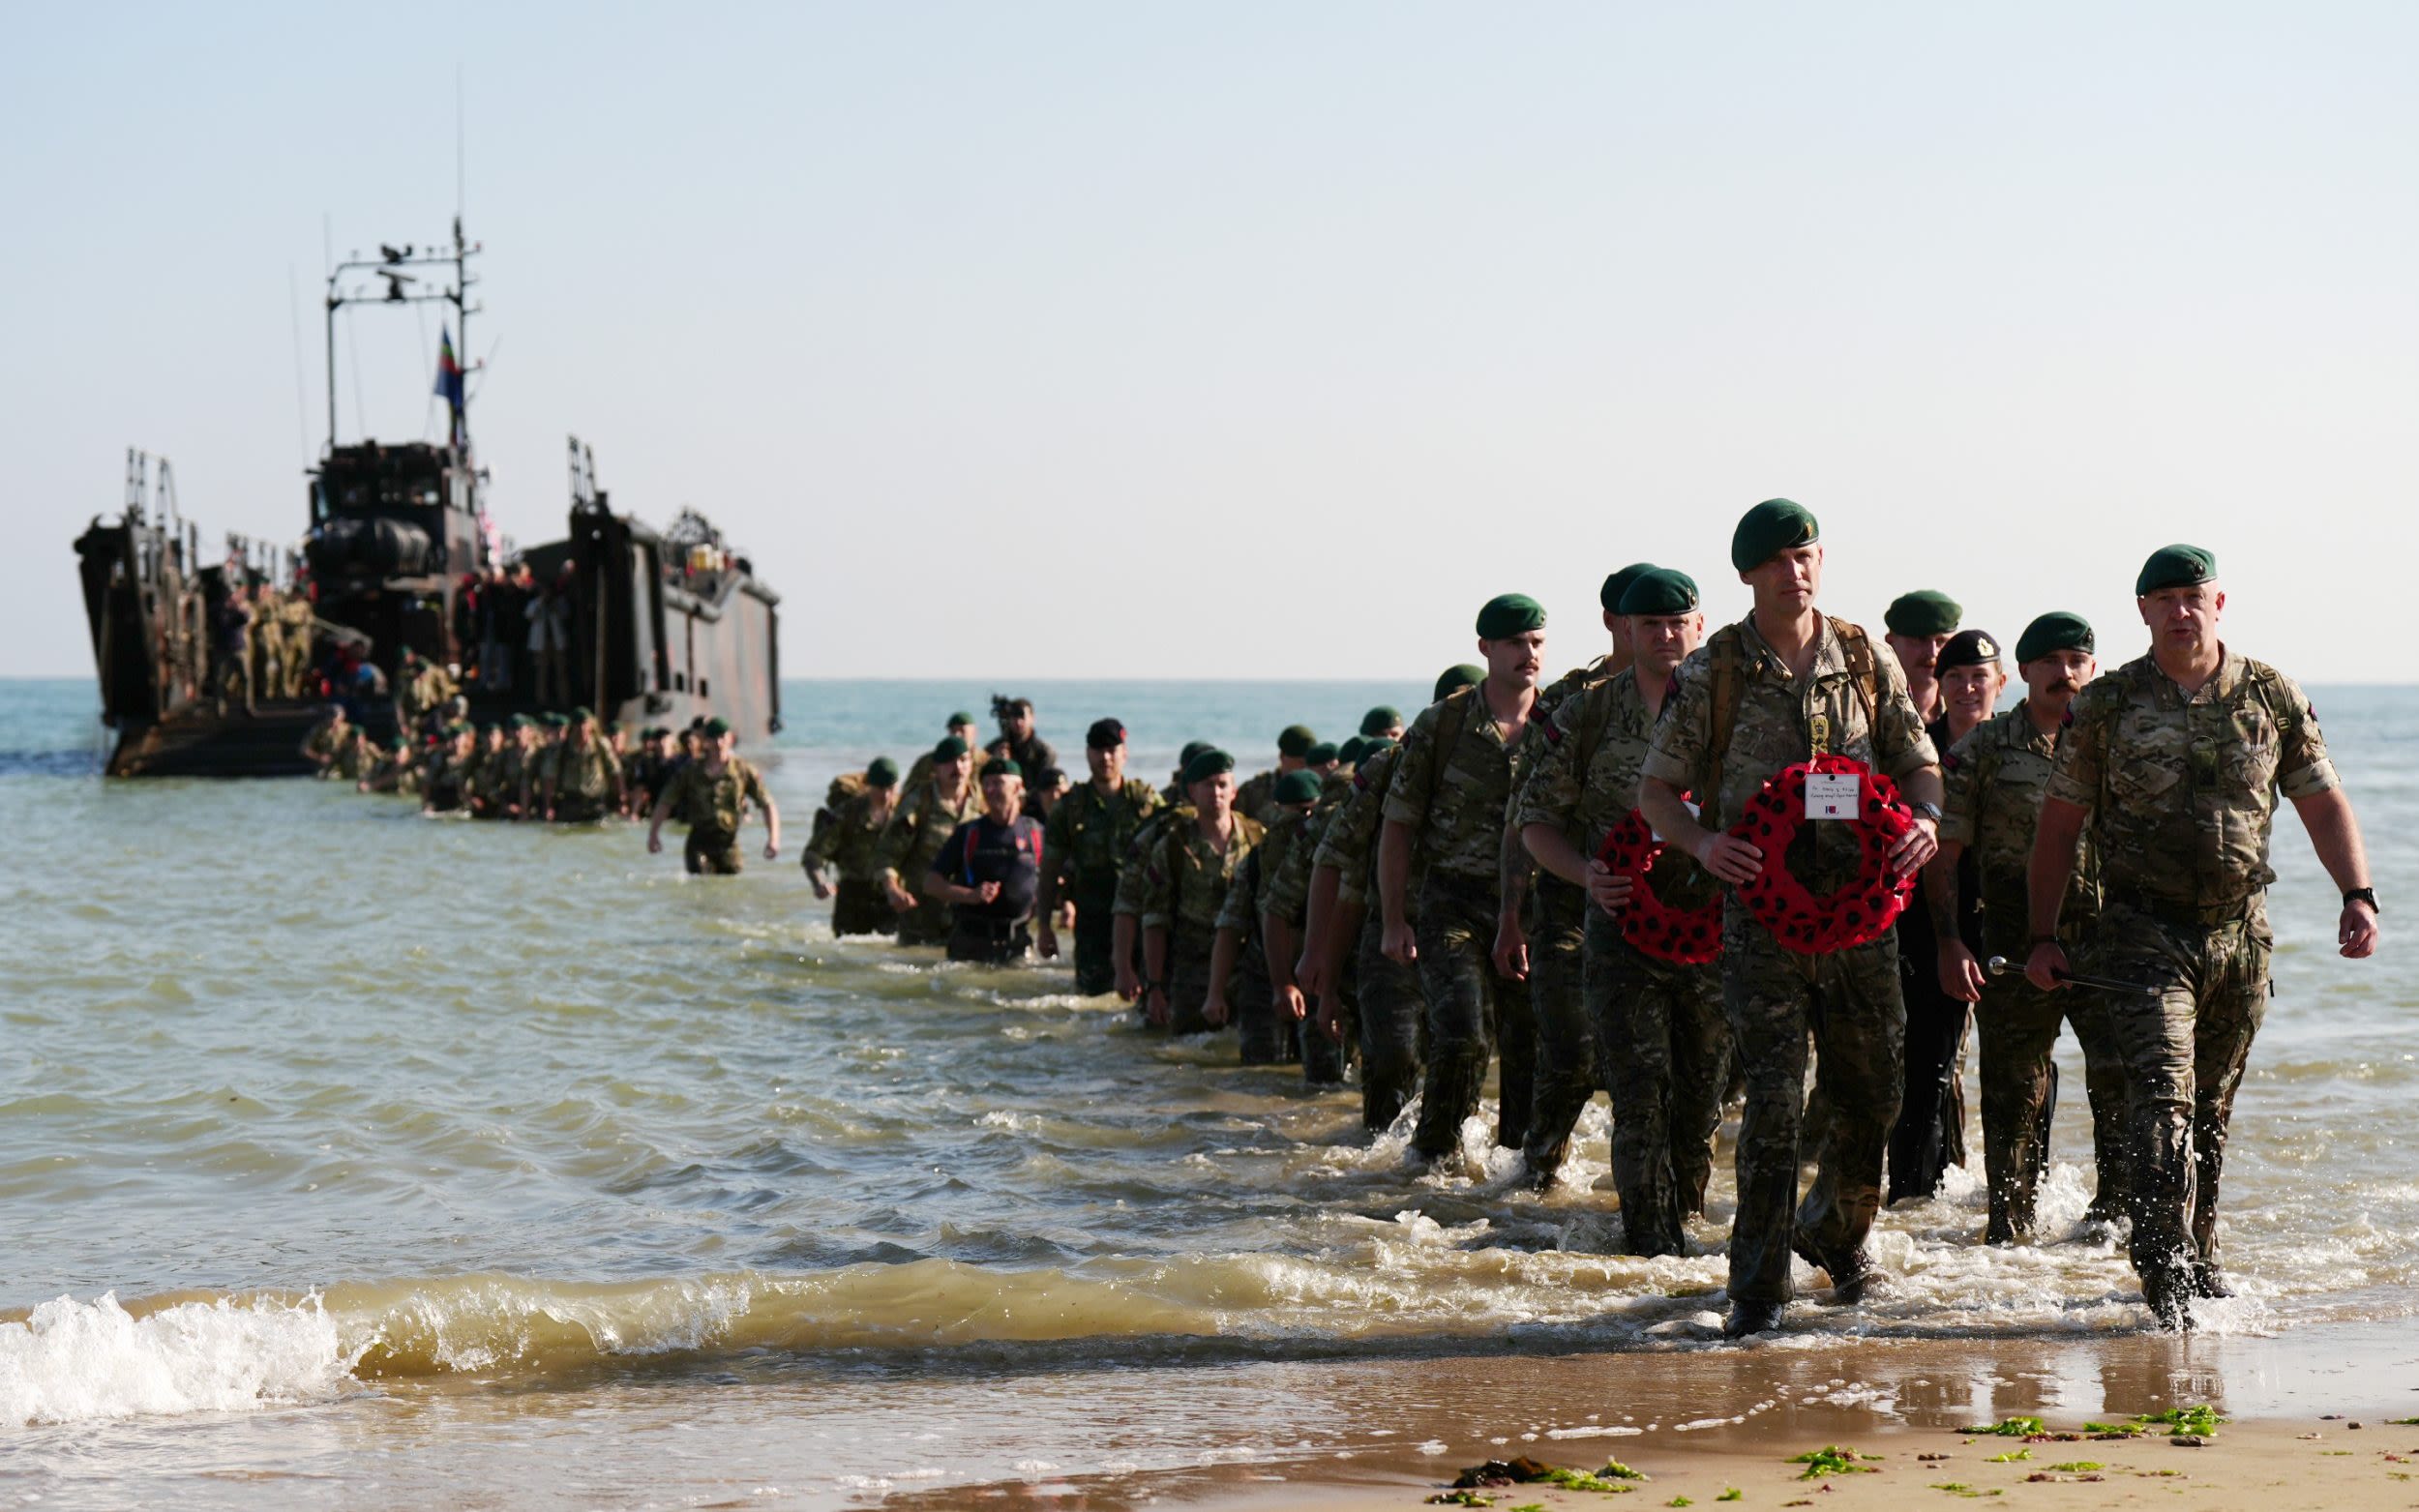 D-Day veterans pay respects on ‘last opportunity’ to honour the dead